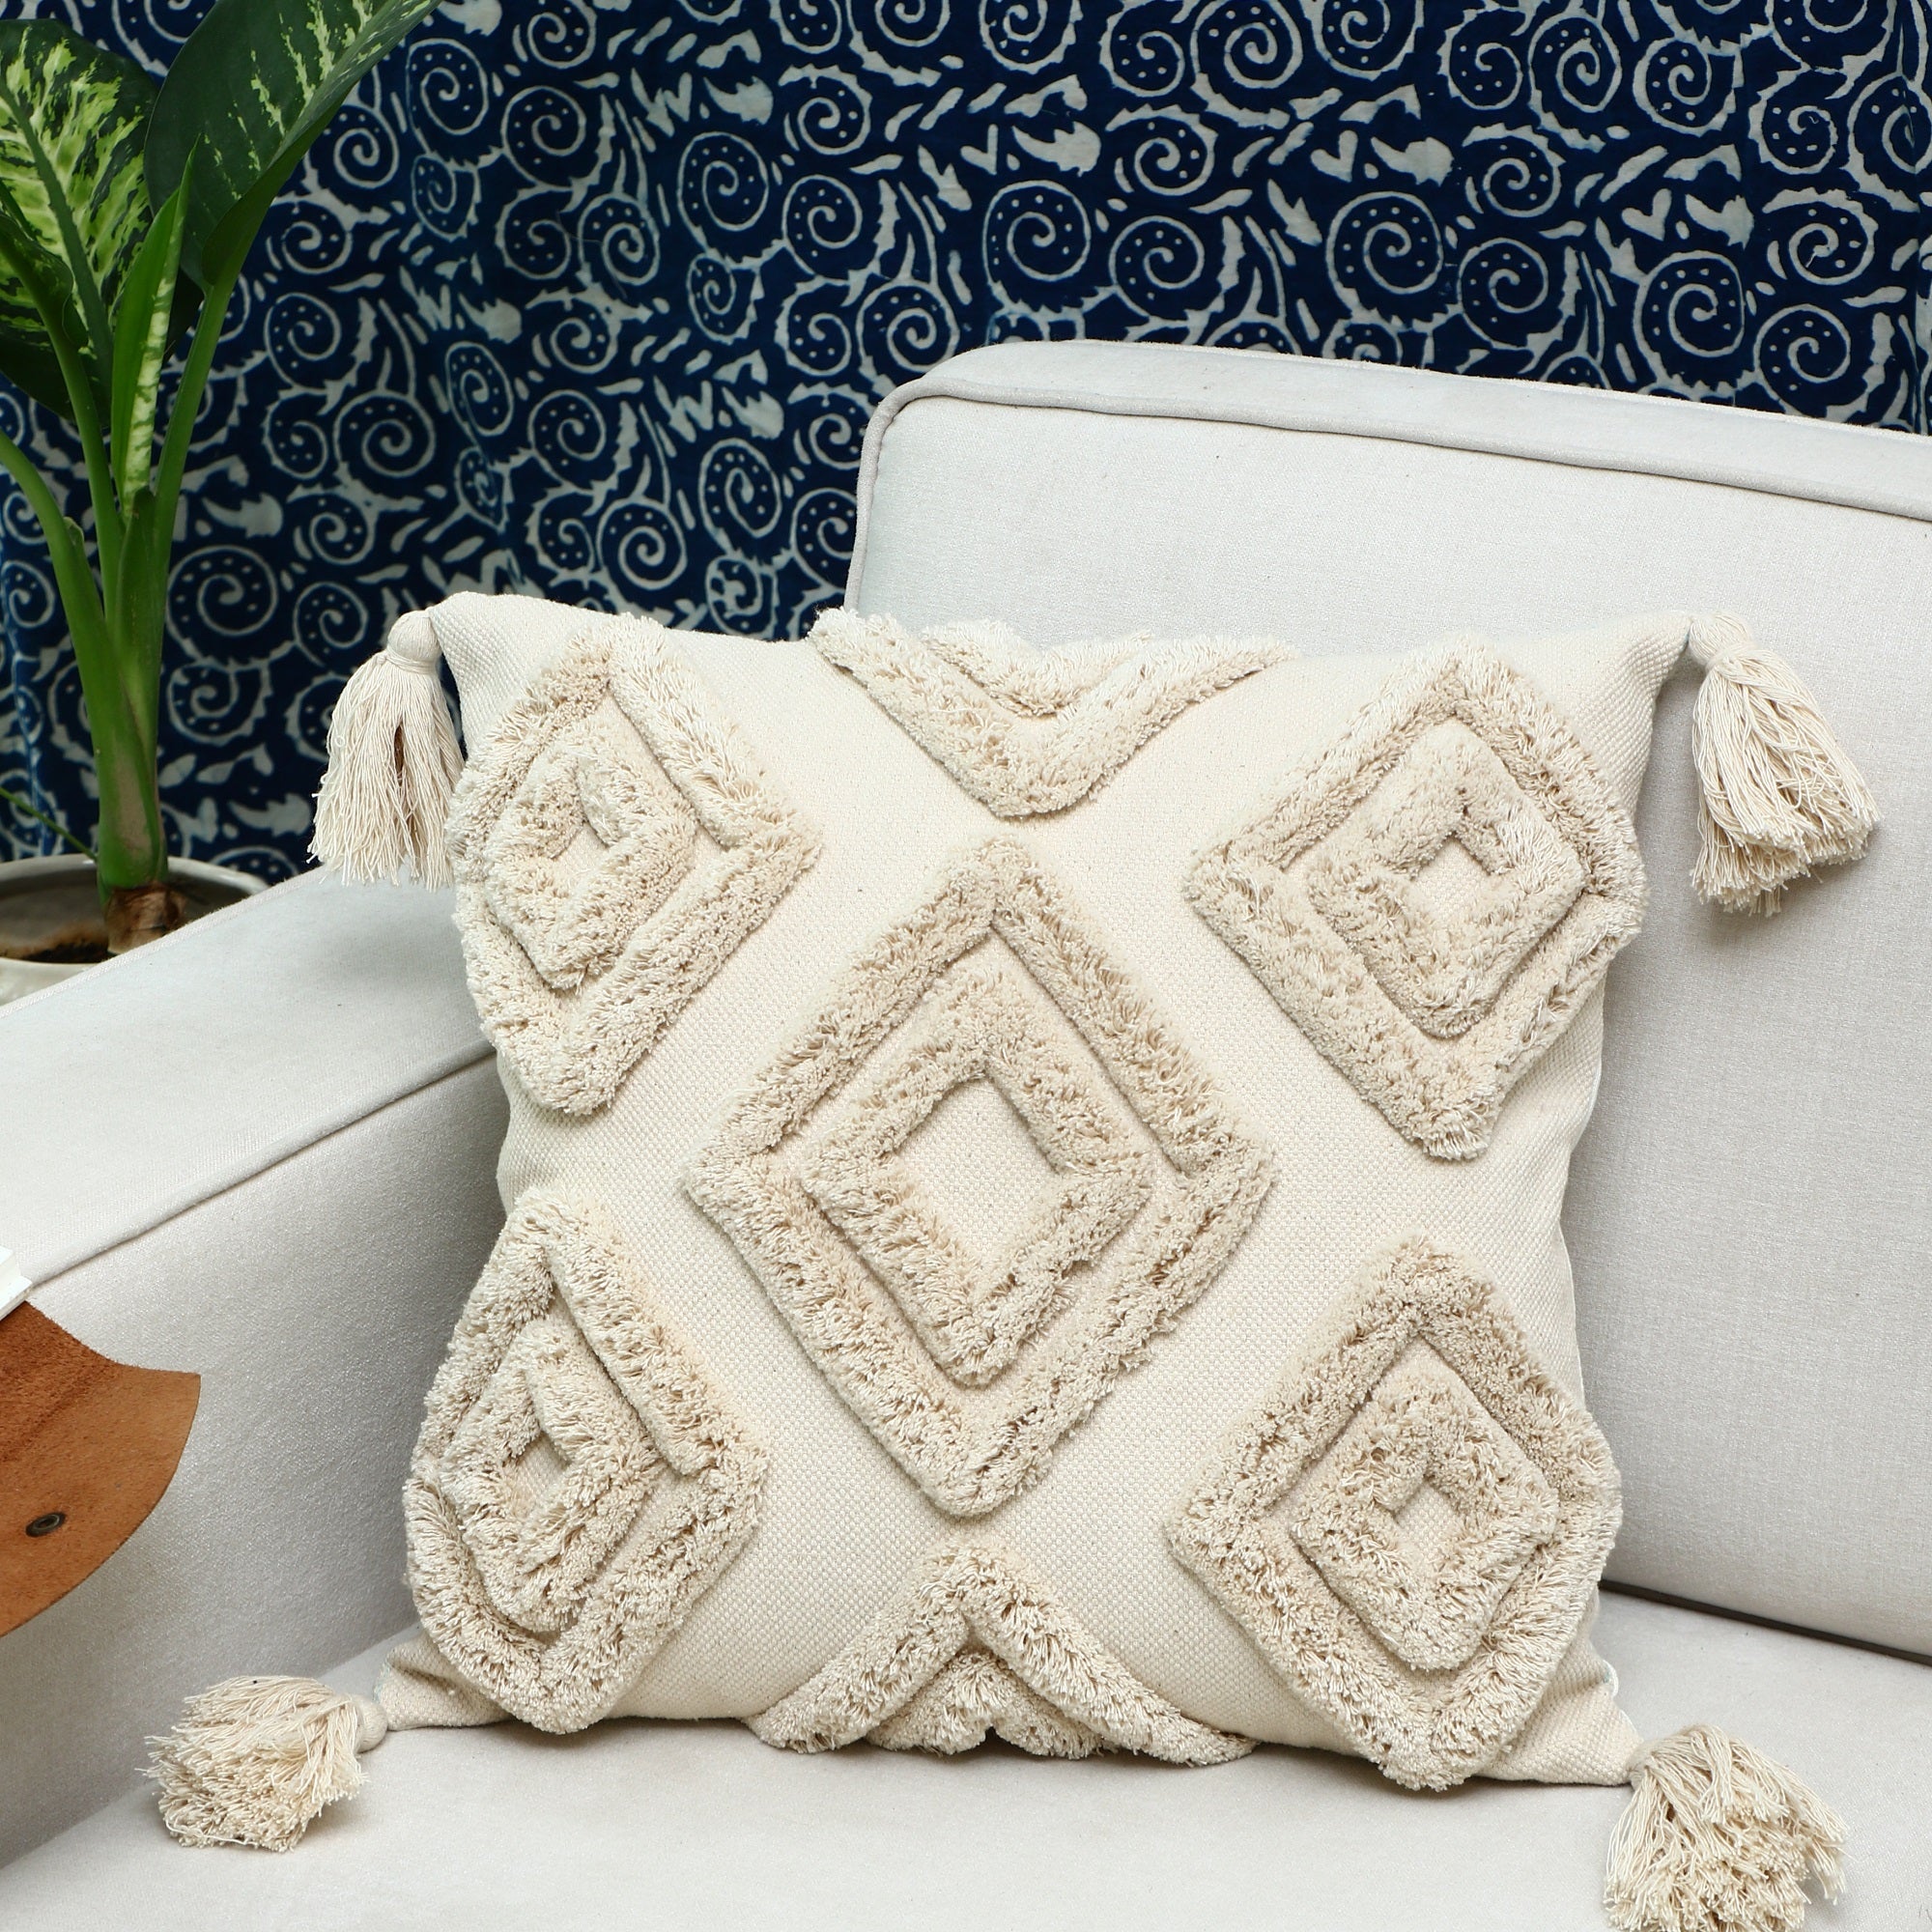 'Eclectic Elegance' Hand-Woven Cotton Wool Cushion Cover